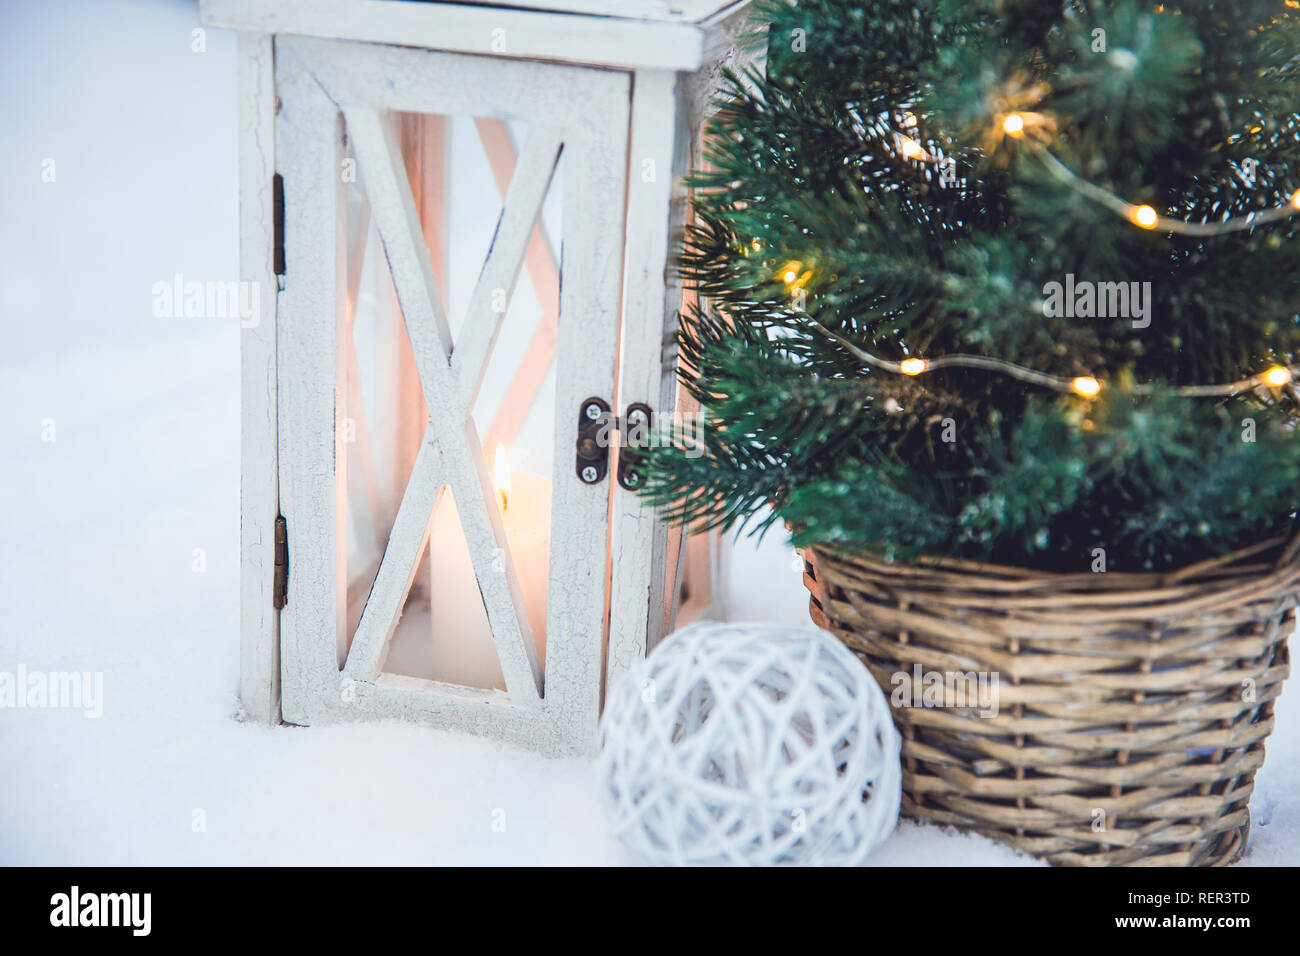 White wooden lantern with white wax candle lit and small Christmas fir tree with micro led lights in brown rattan flower pot in snow, snowy fir trees Stock Photo